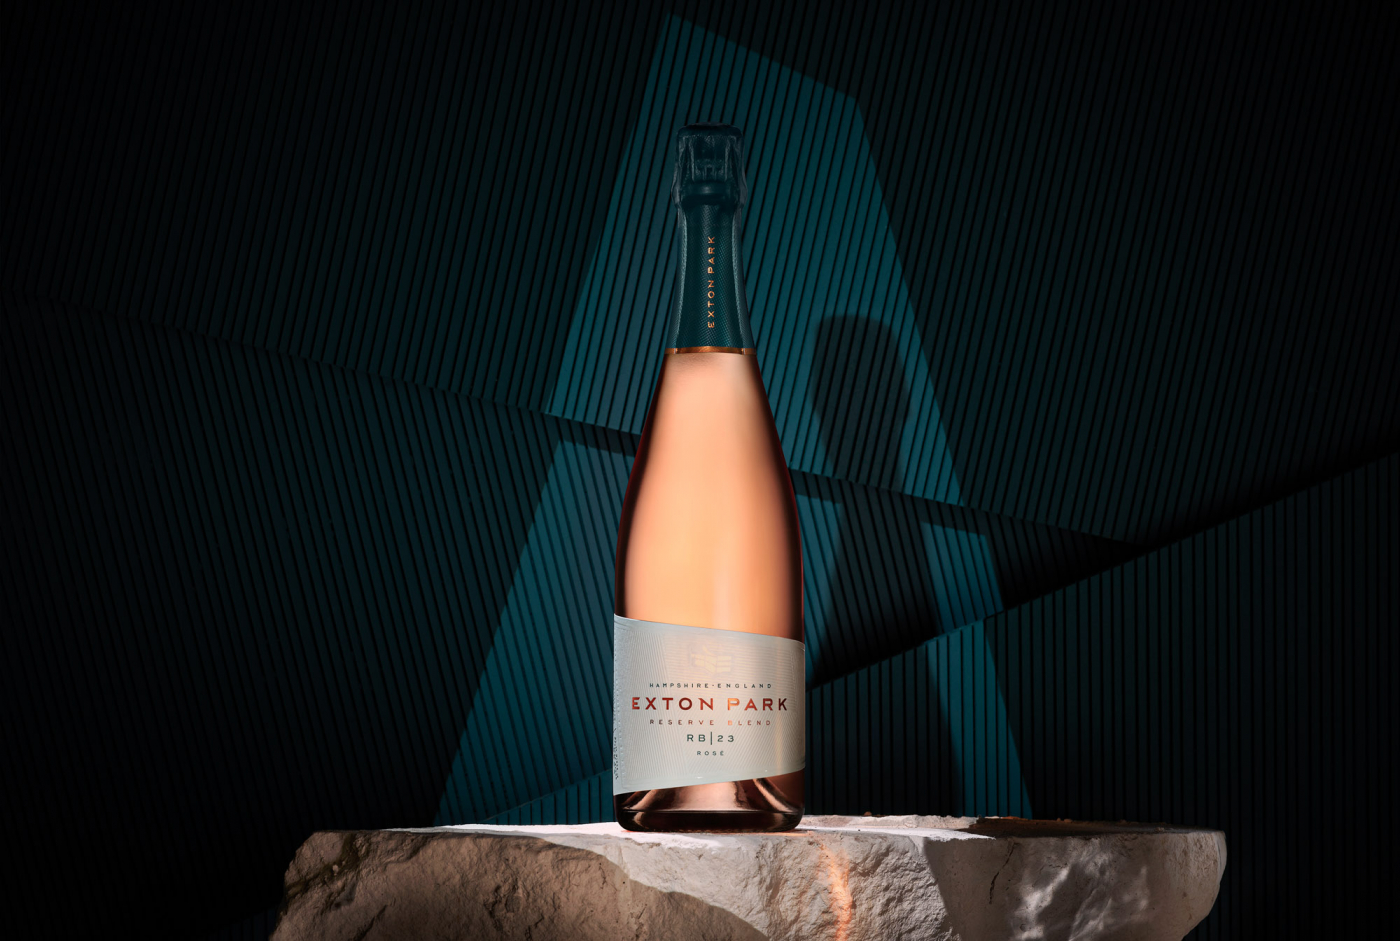 Effervesce sense | Karen Krizanovich on Exton Park Rosé and champagne for a good cause